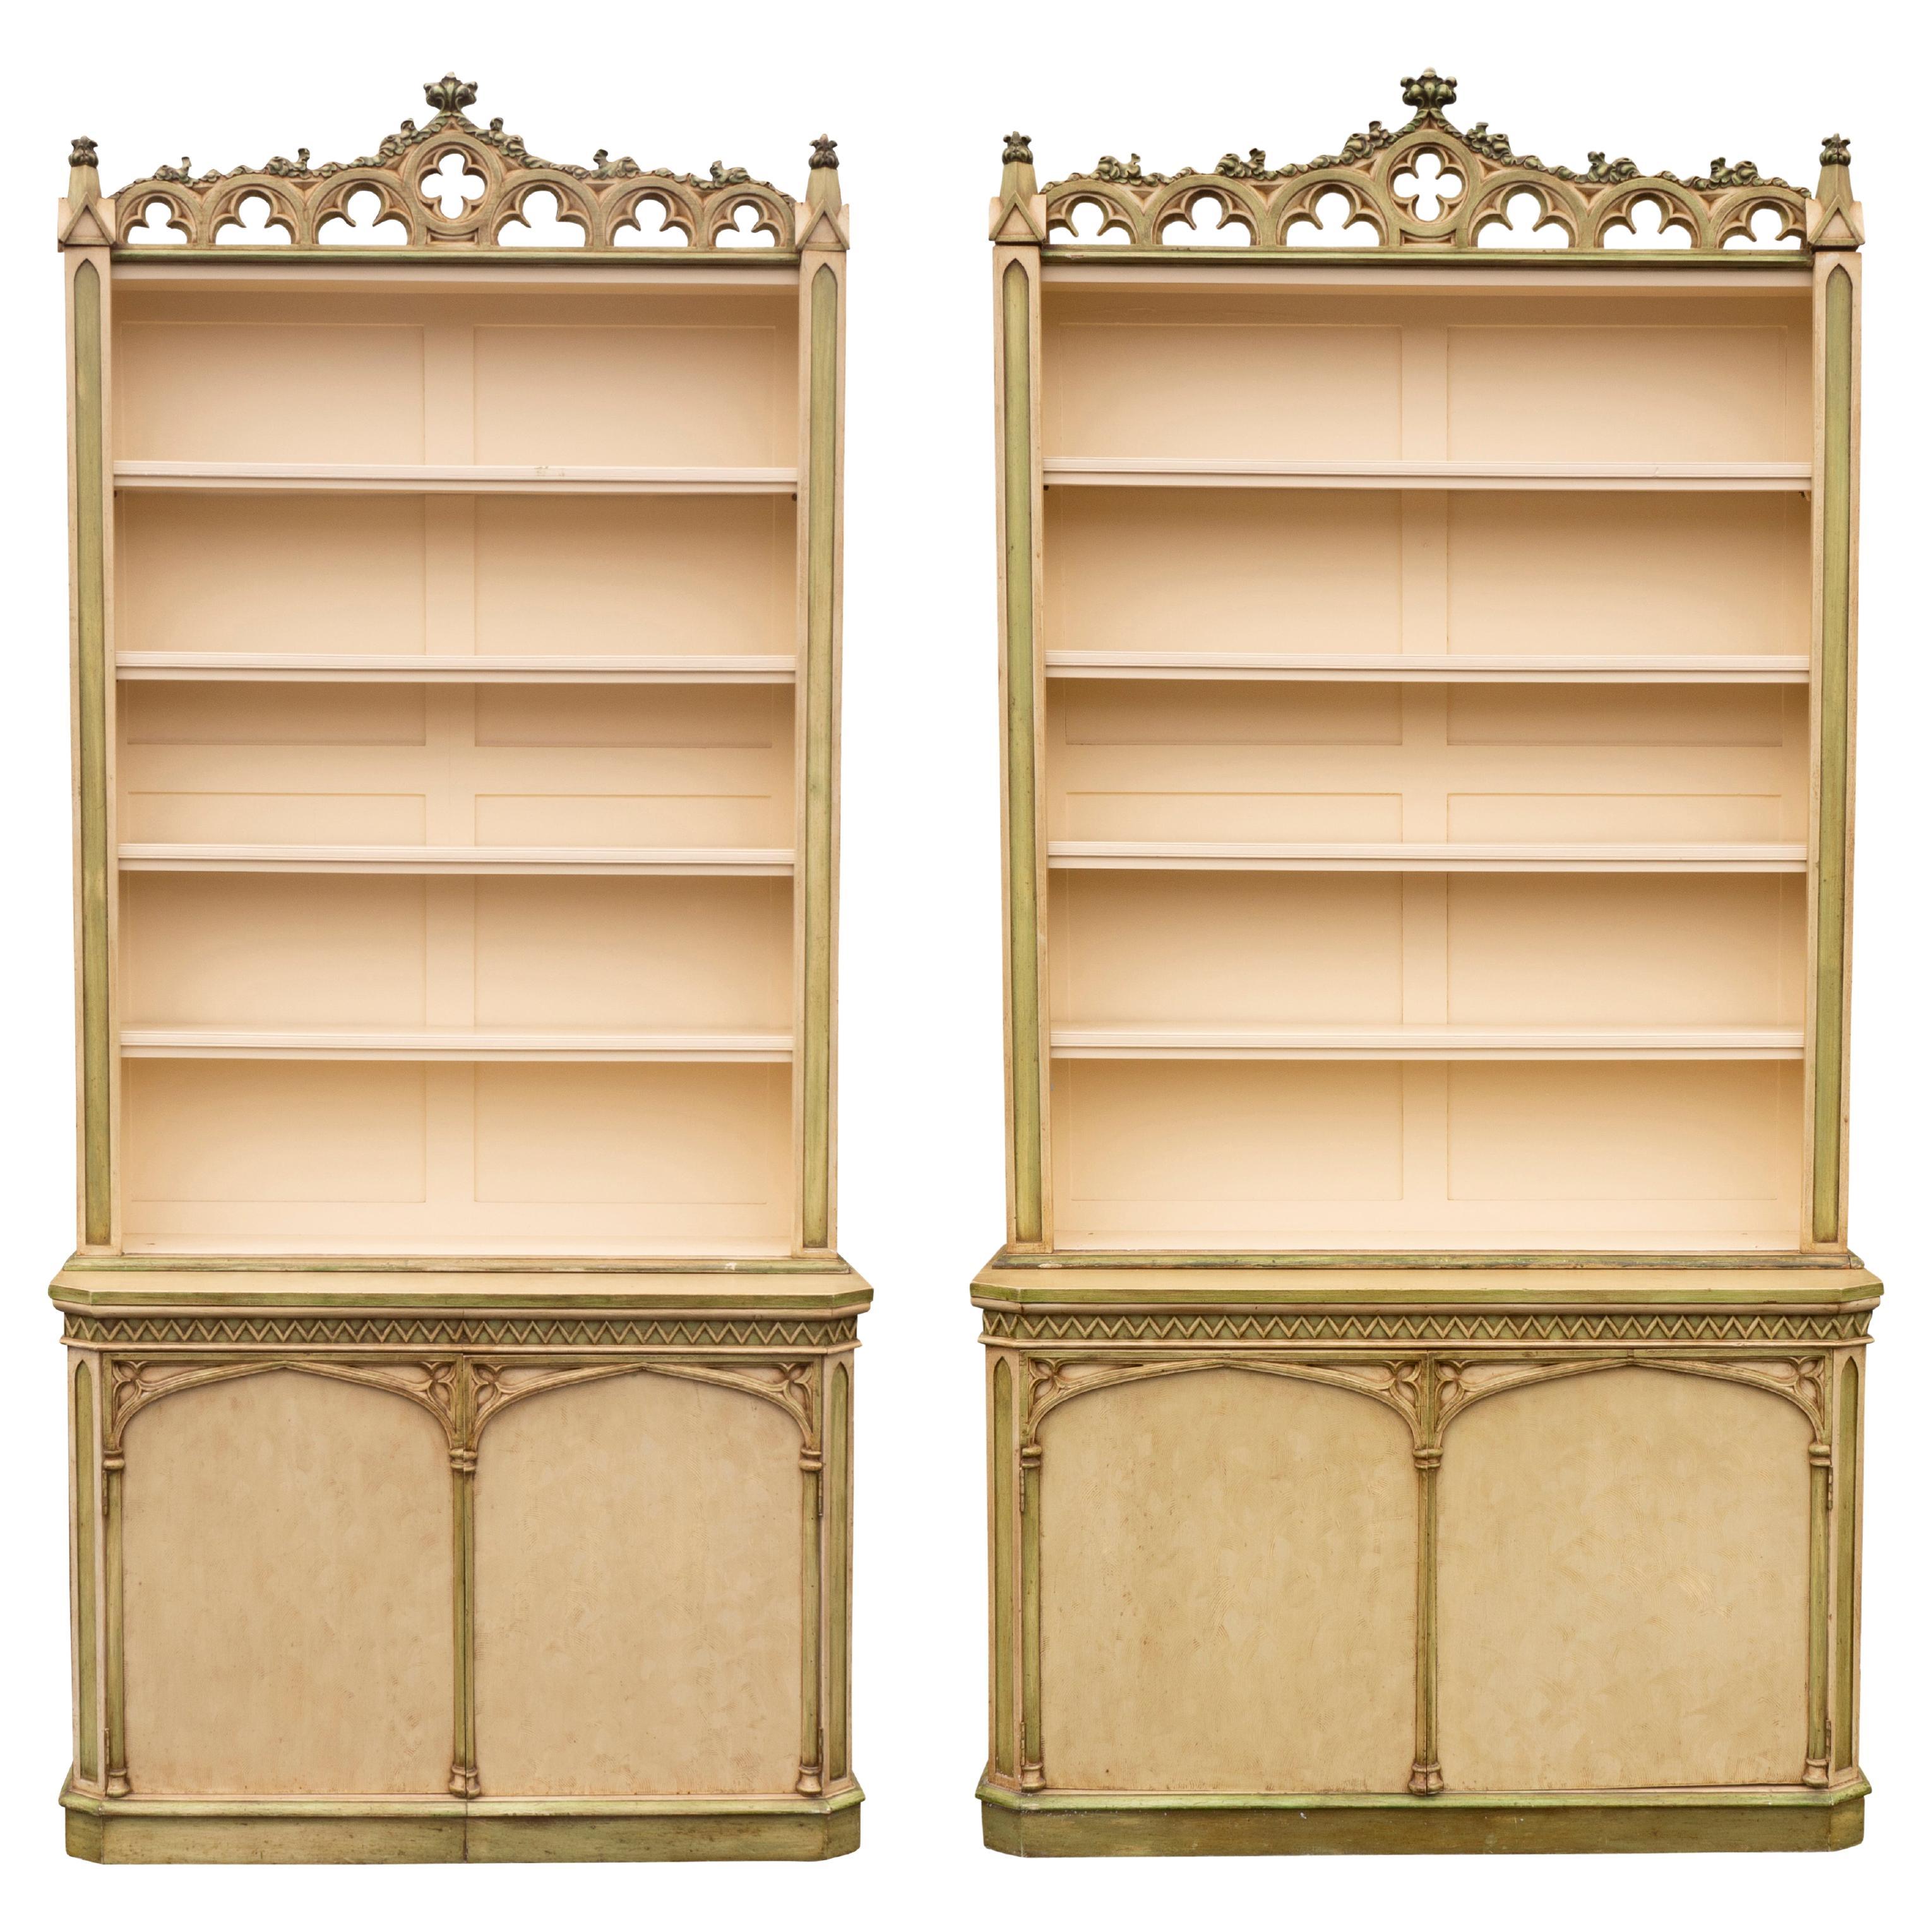 Pair Of Gothic Revival Painted Bookcases Of Slightly Different Proportions